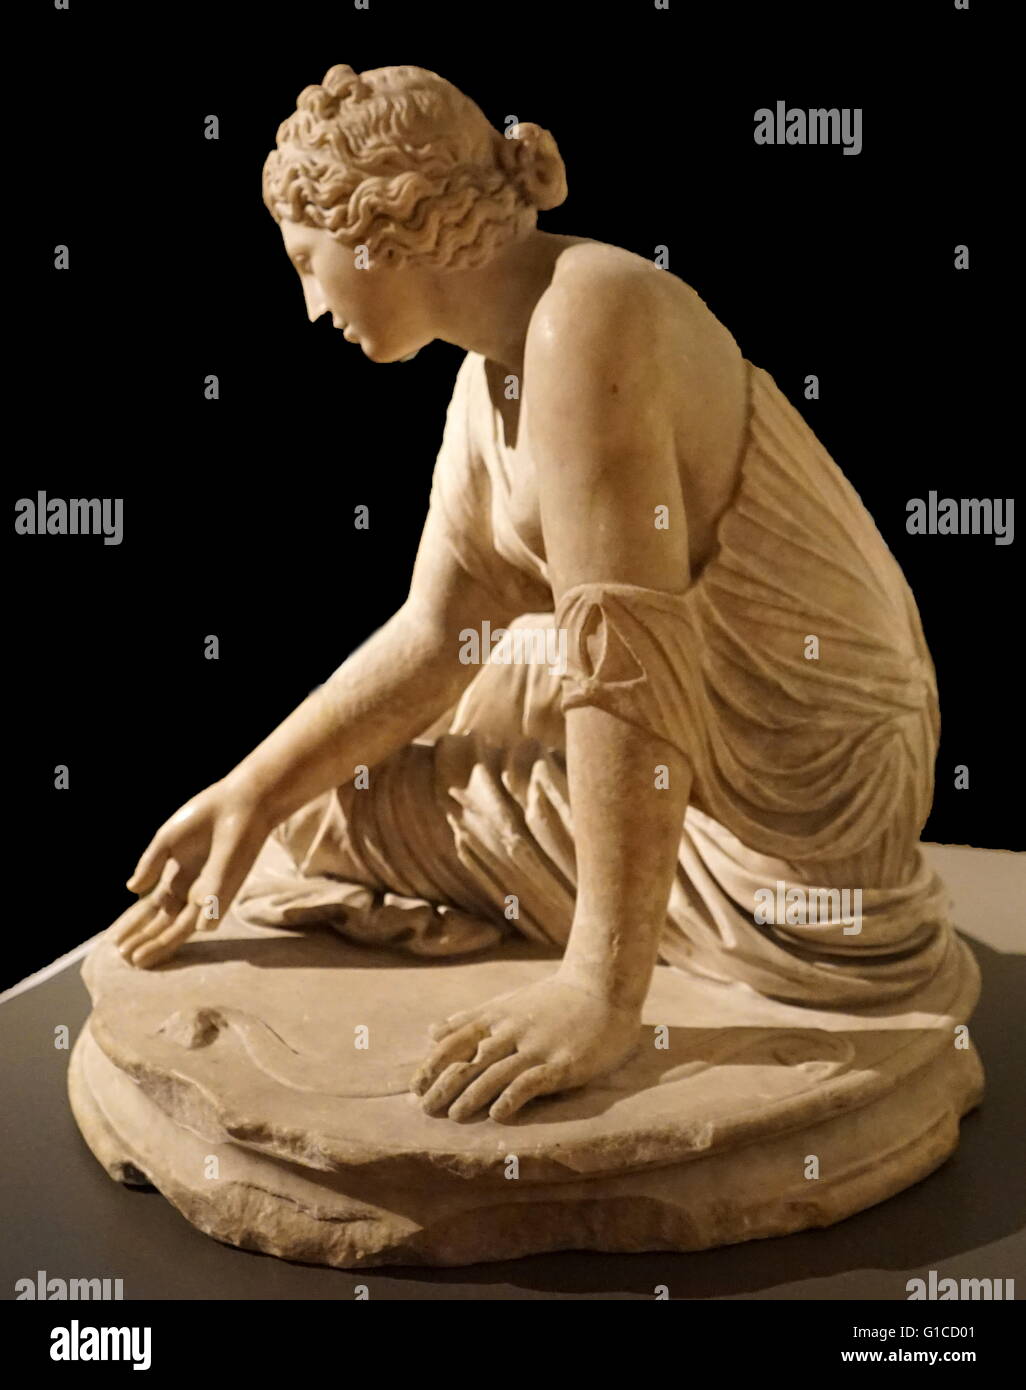 Marble statue of a young Roman girl playing Knucklebones, also known as Fivestones or Jacks, Dated 2nd Century AD Stock Photo